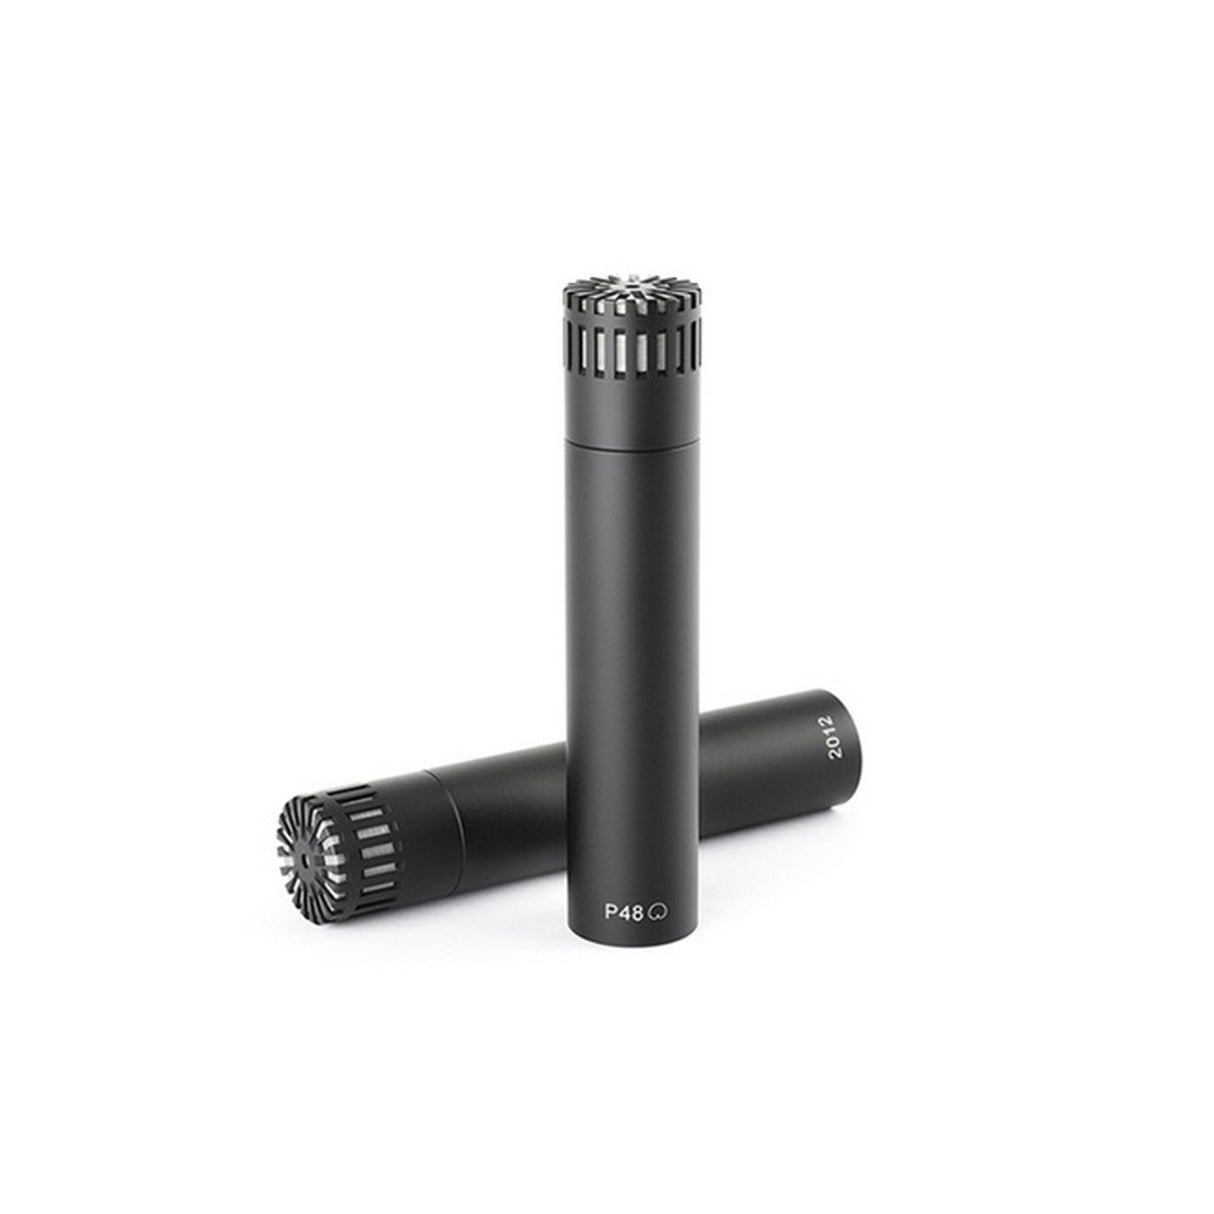 DPA ST2012 Compact Cardioid Condenser Microphones, Stereo Pair